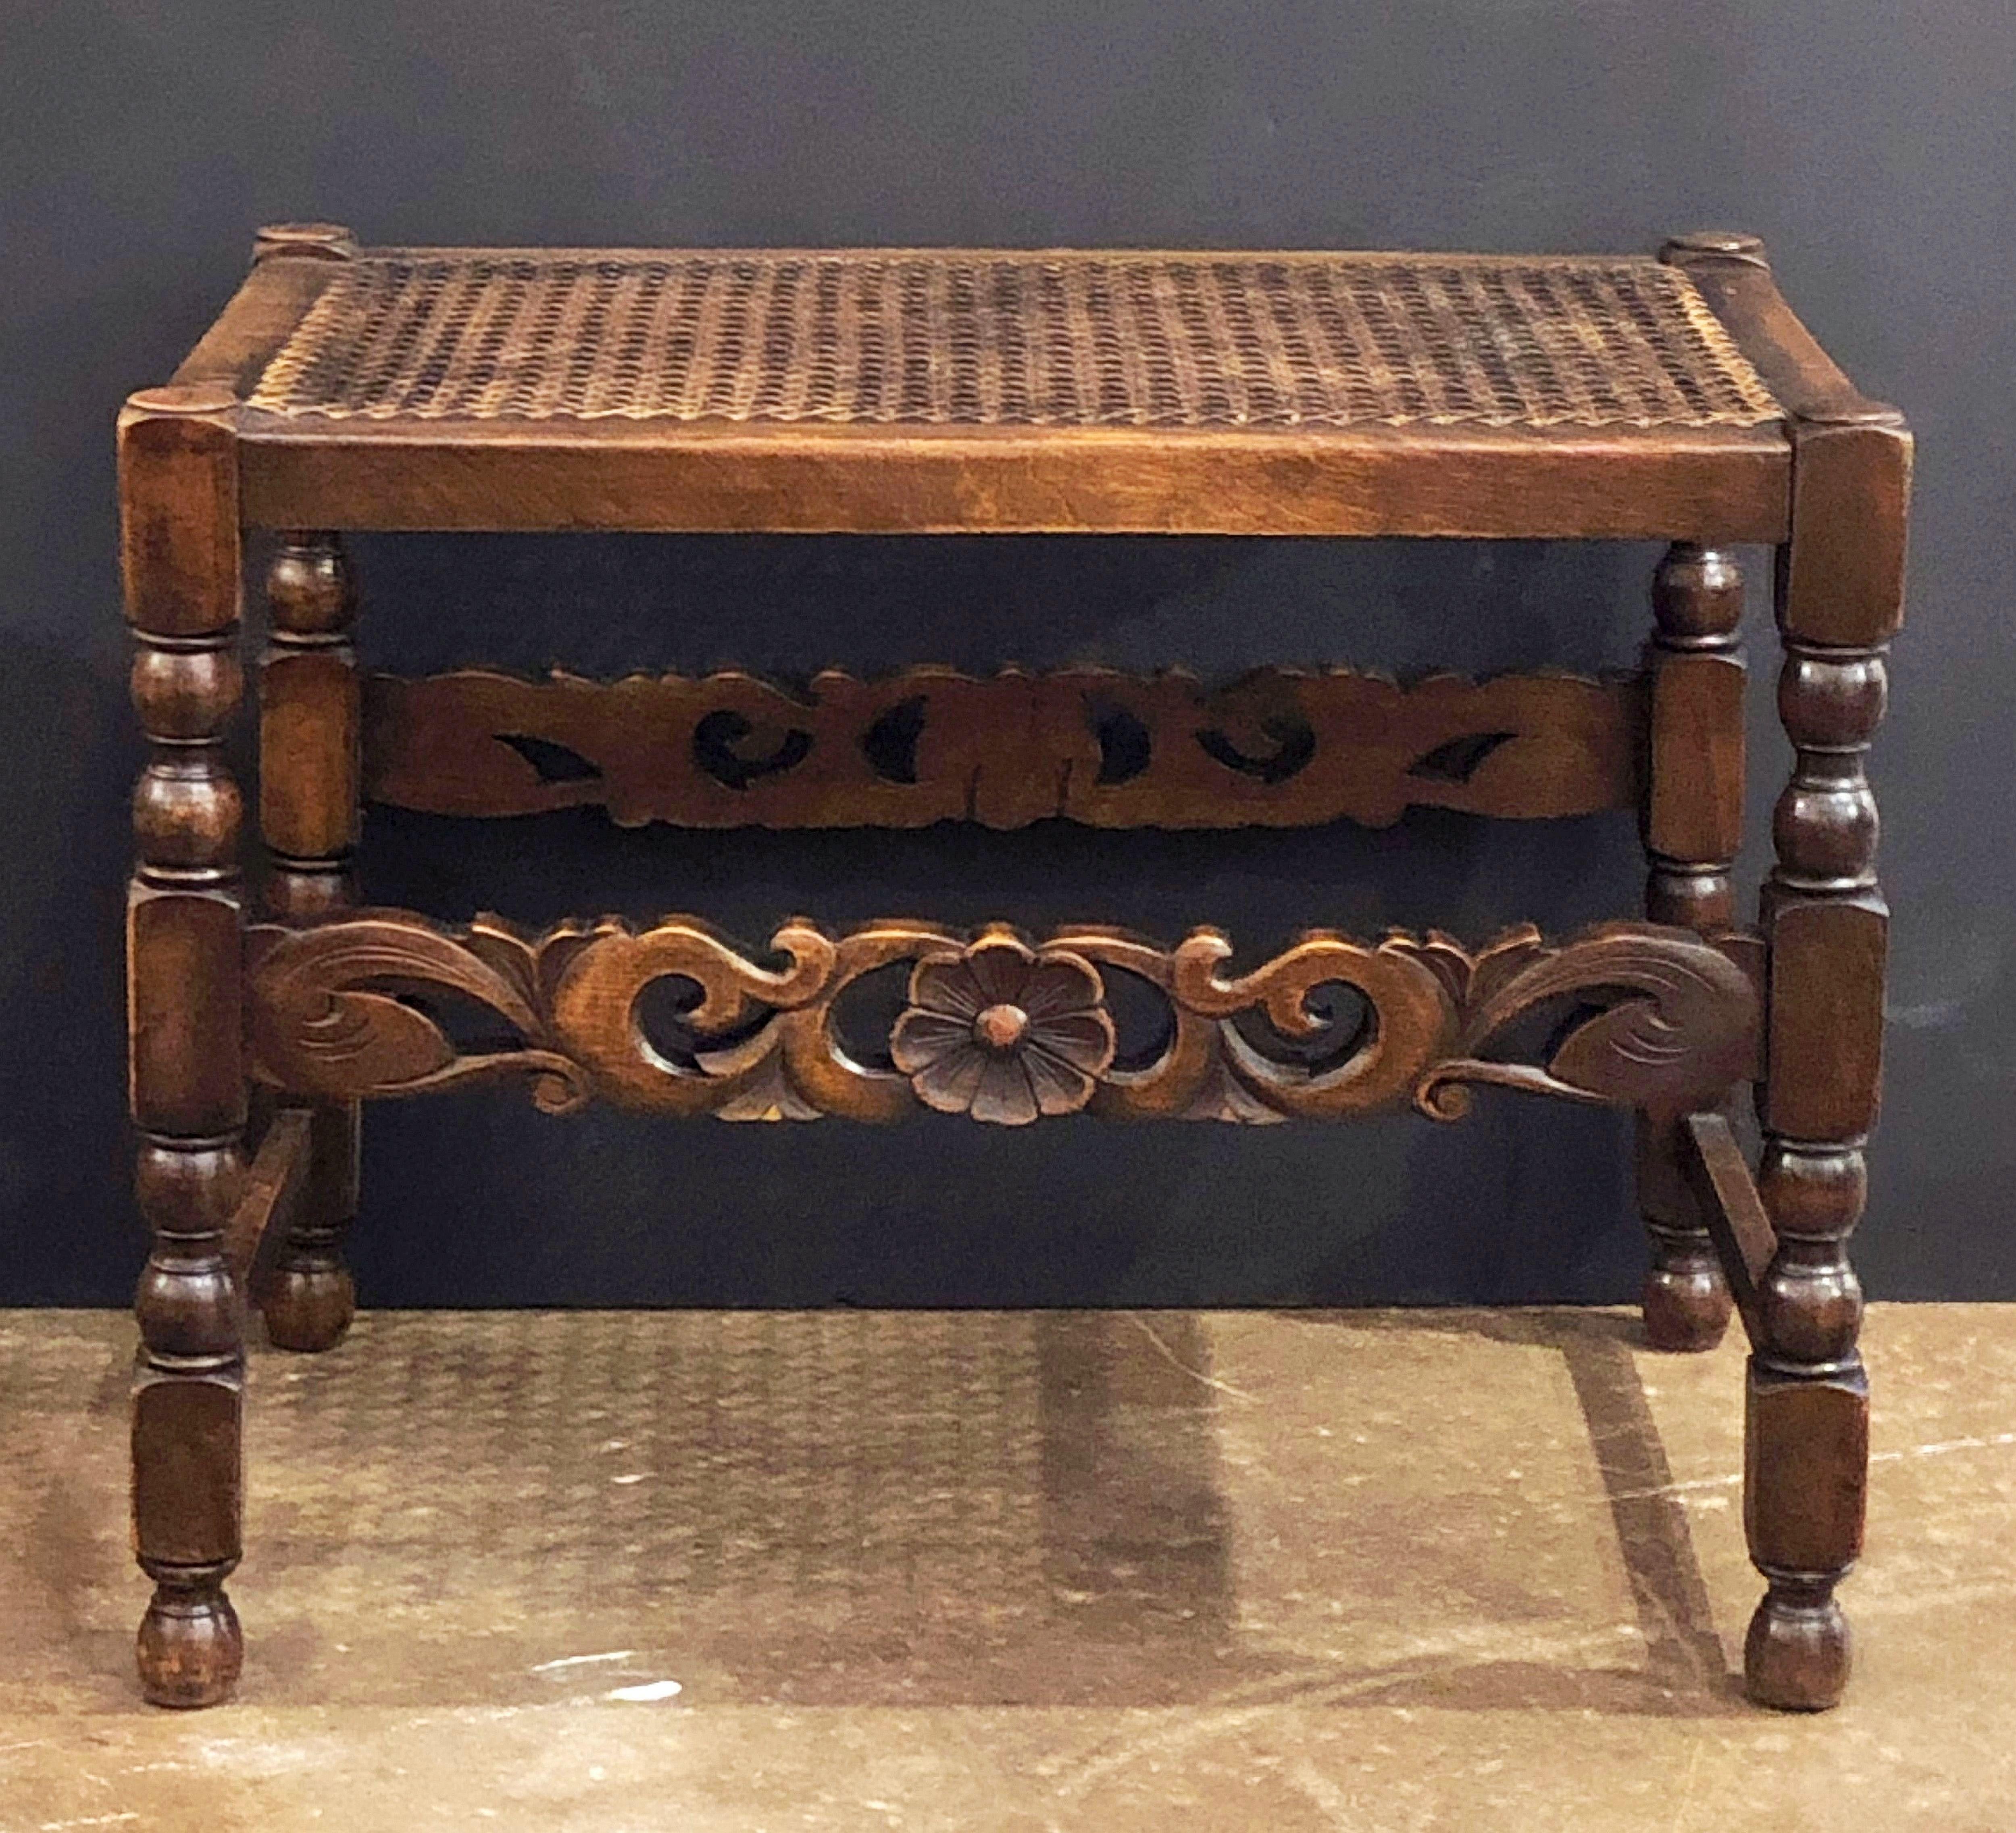 A fine English bergère stool or bench seat featuring a caned top or seat with a turned wood stretcher and carved wood decorative supports.

Dimensions: H 18 1/2 inches x W 24 inches x D 16 inches